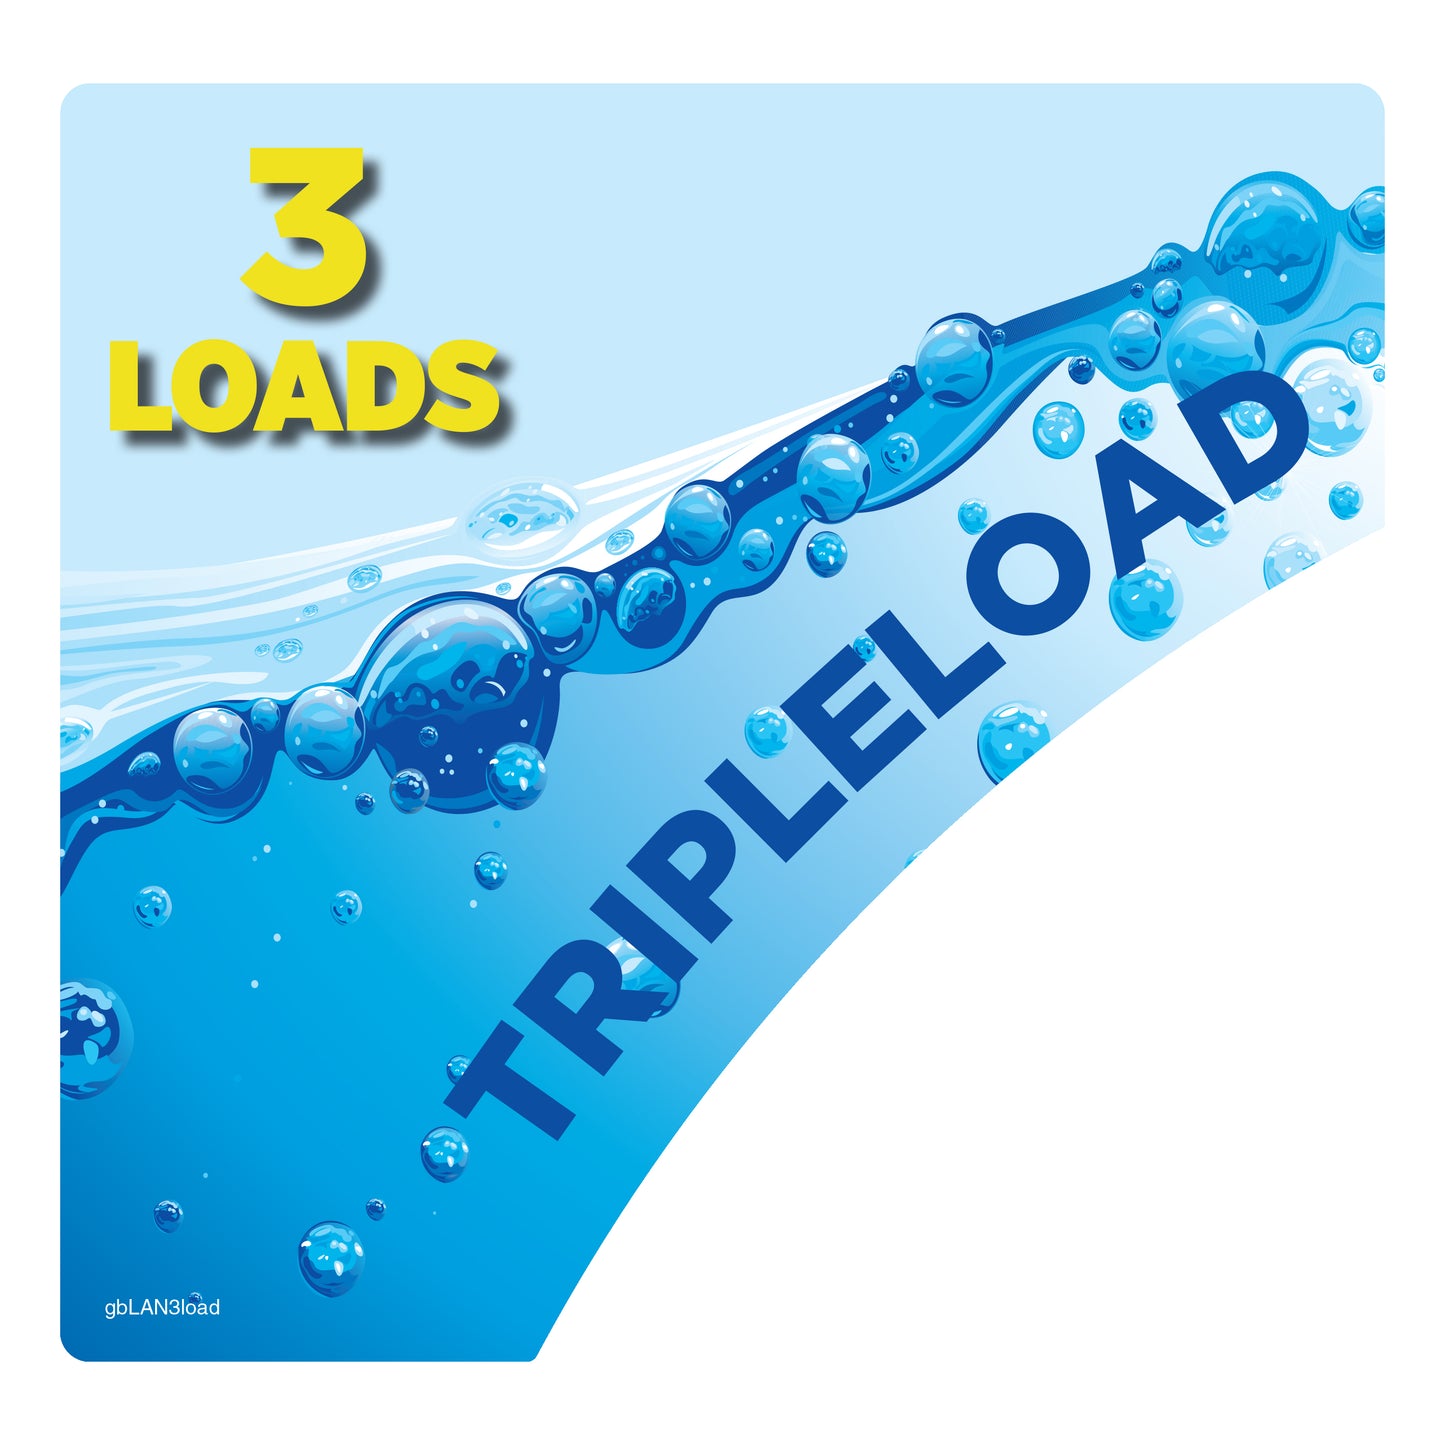 Decal for placement on washing machines at Laundromat displaying Tripleload - 3 Loads in size.